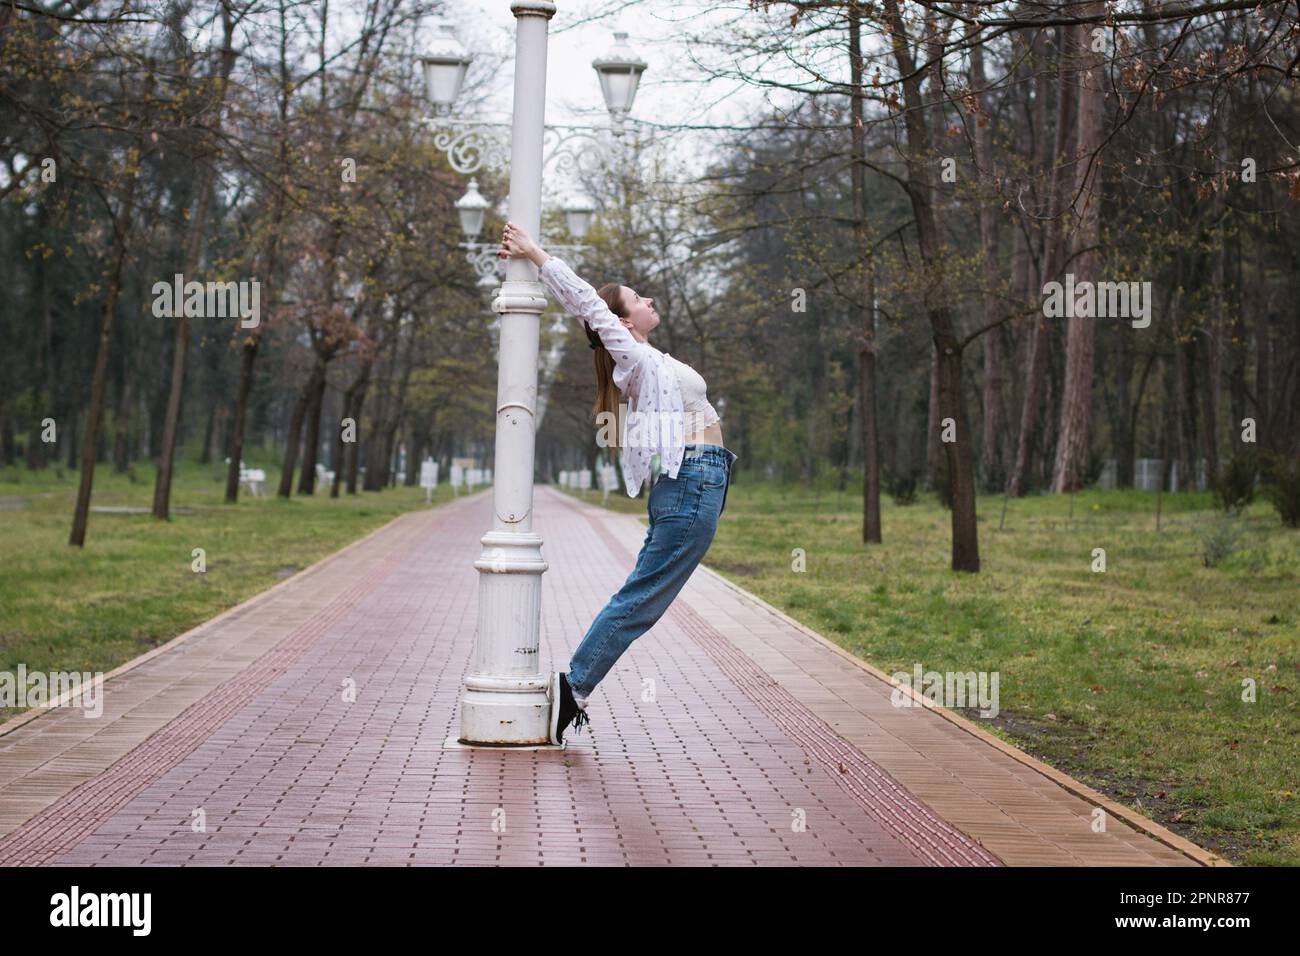 Young woman dancing around the light pole outdoors in the park, in rainy weather. Stock Photo